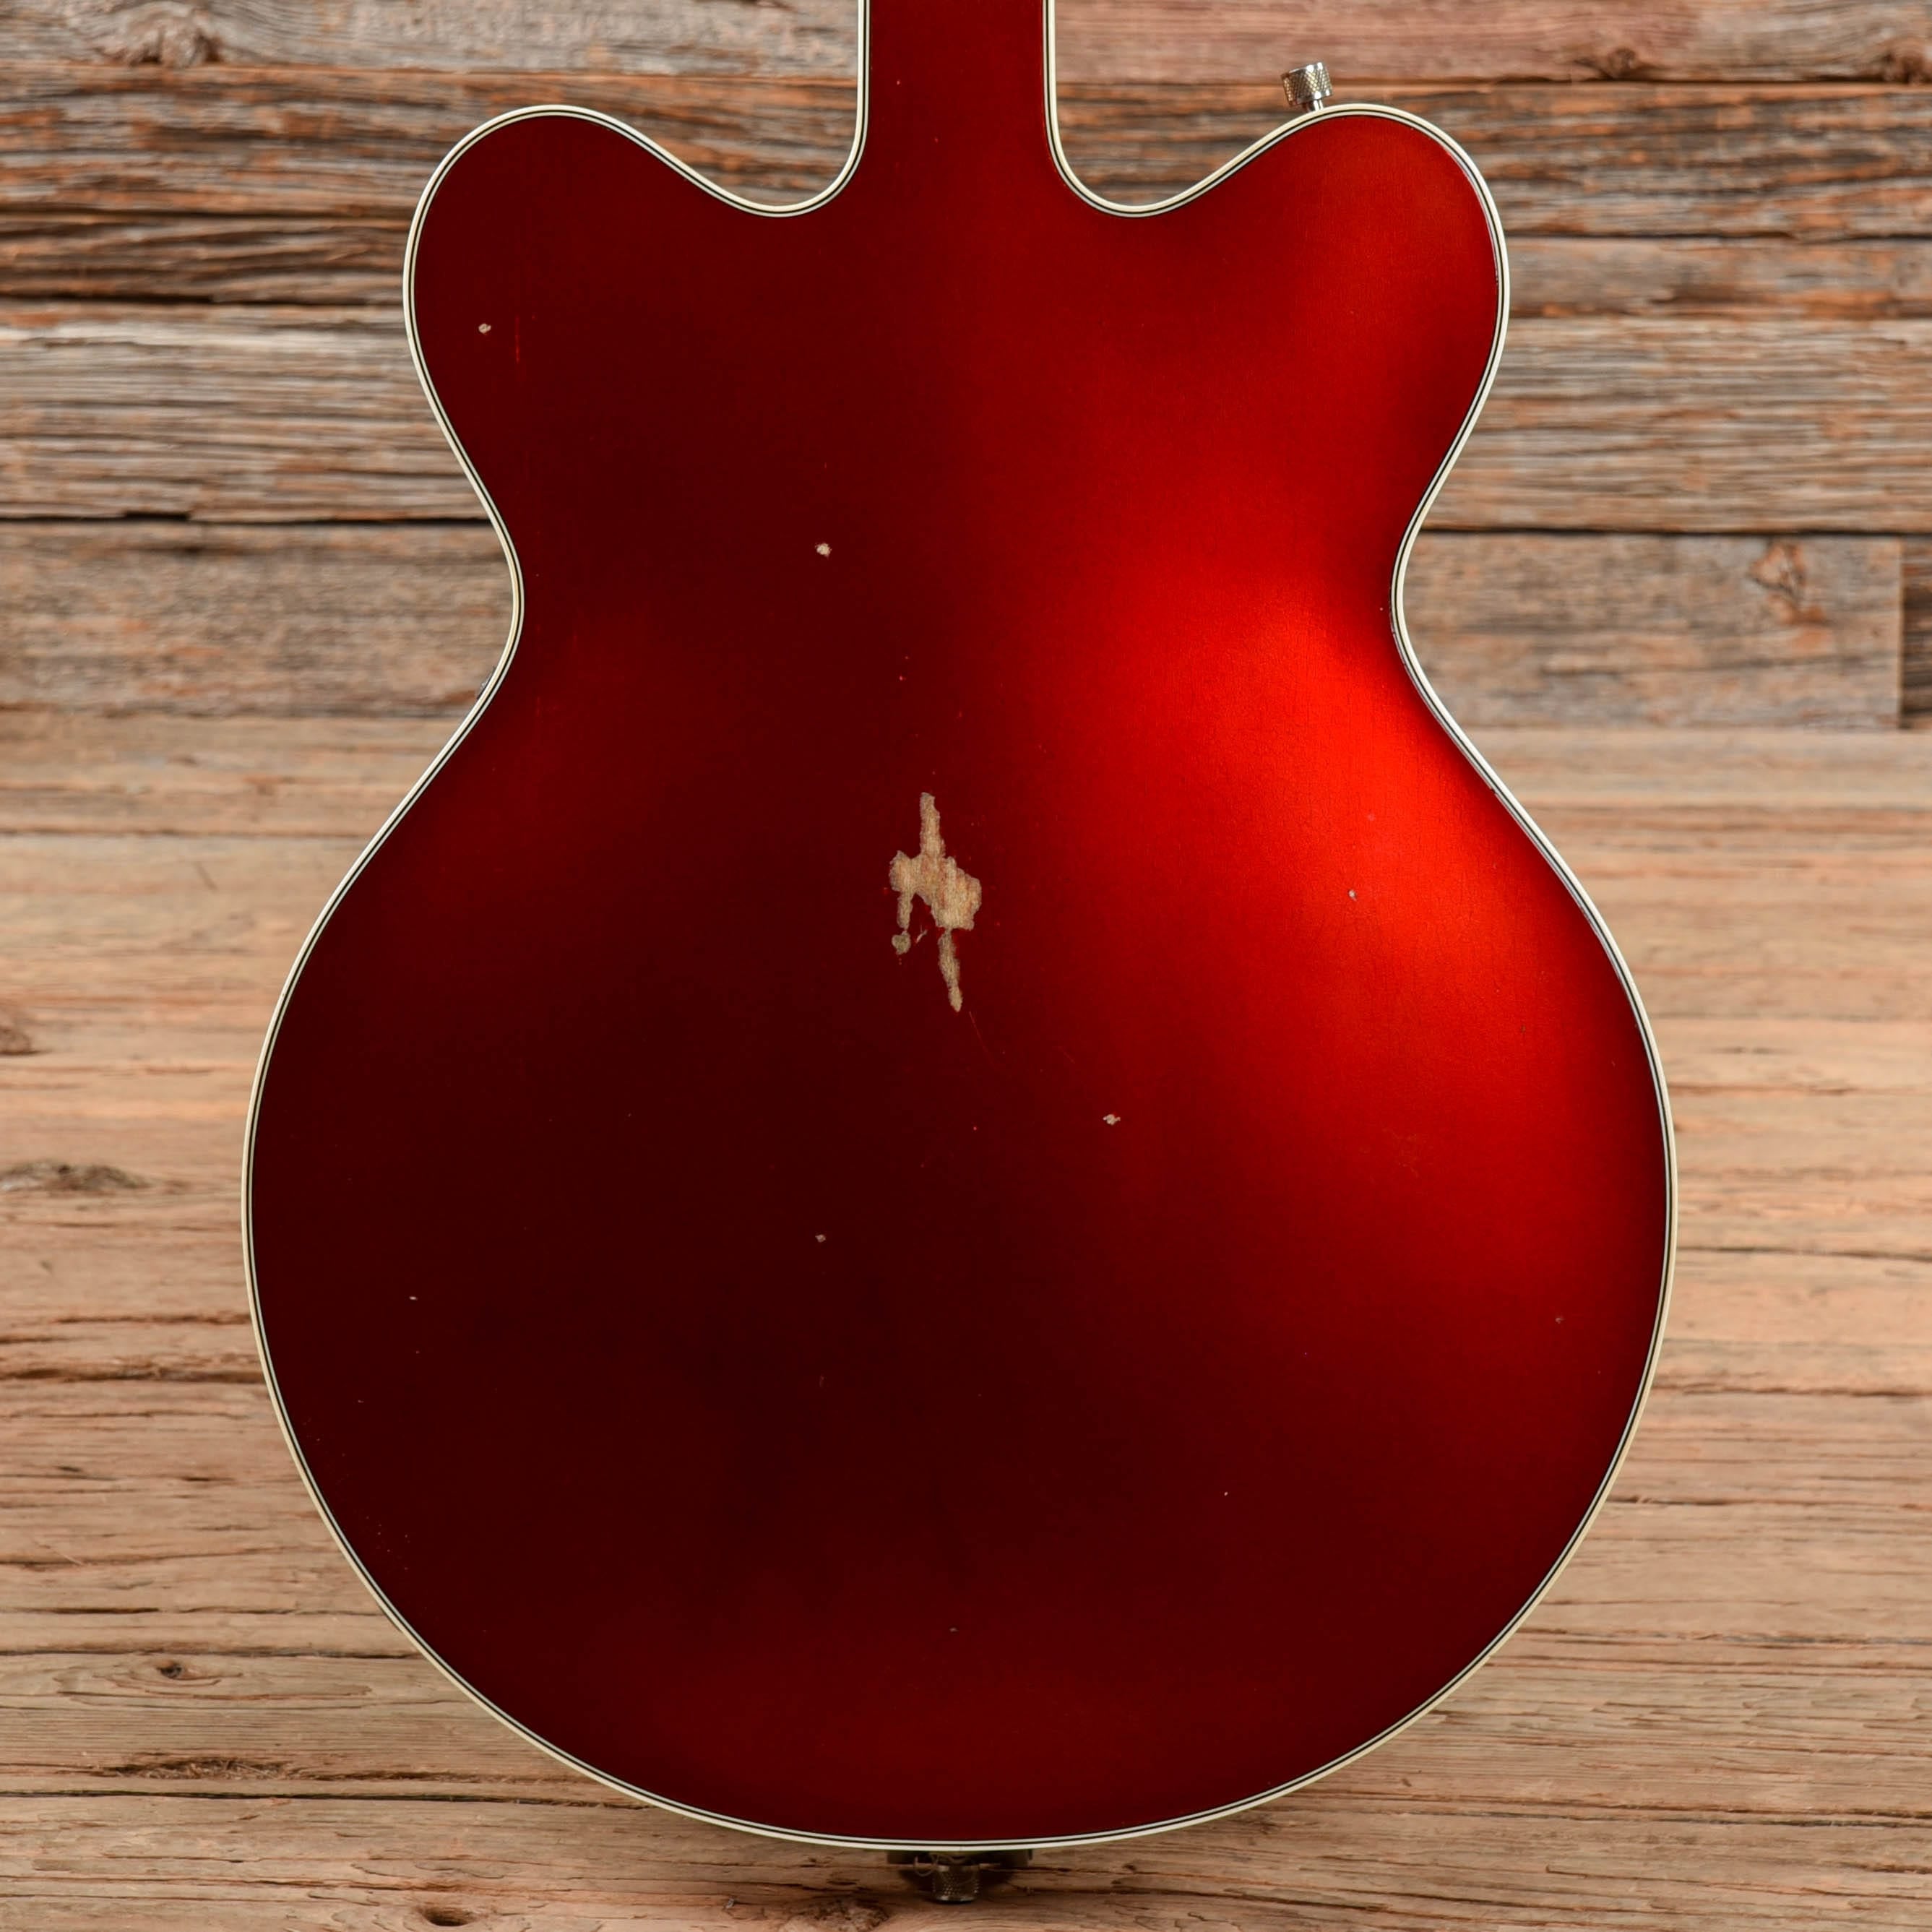 Gretsch Stern Masterbuilt Super Broadkaster Candy Apple Red 2020 Electric Guitars / Hollow Body